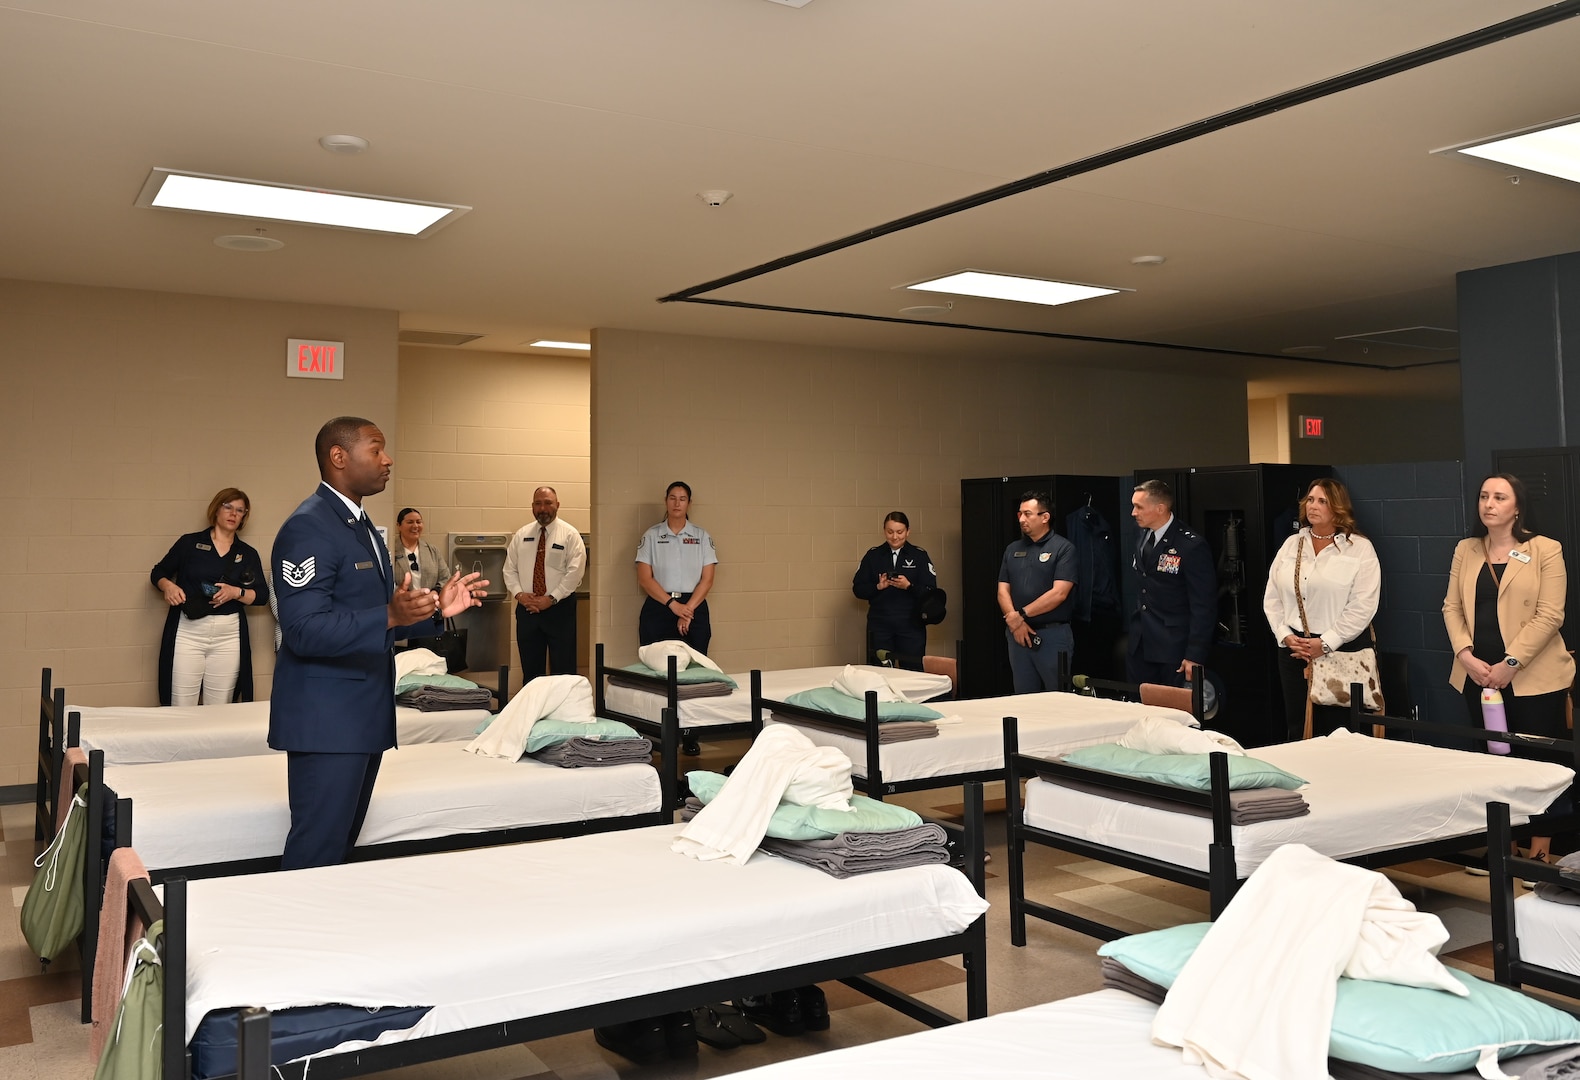 A technical instructor shows the council the Airmen's sleeping quarters.